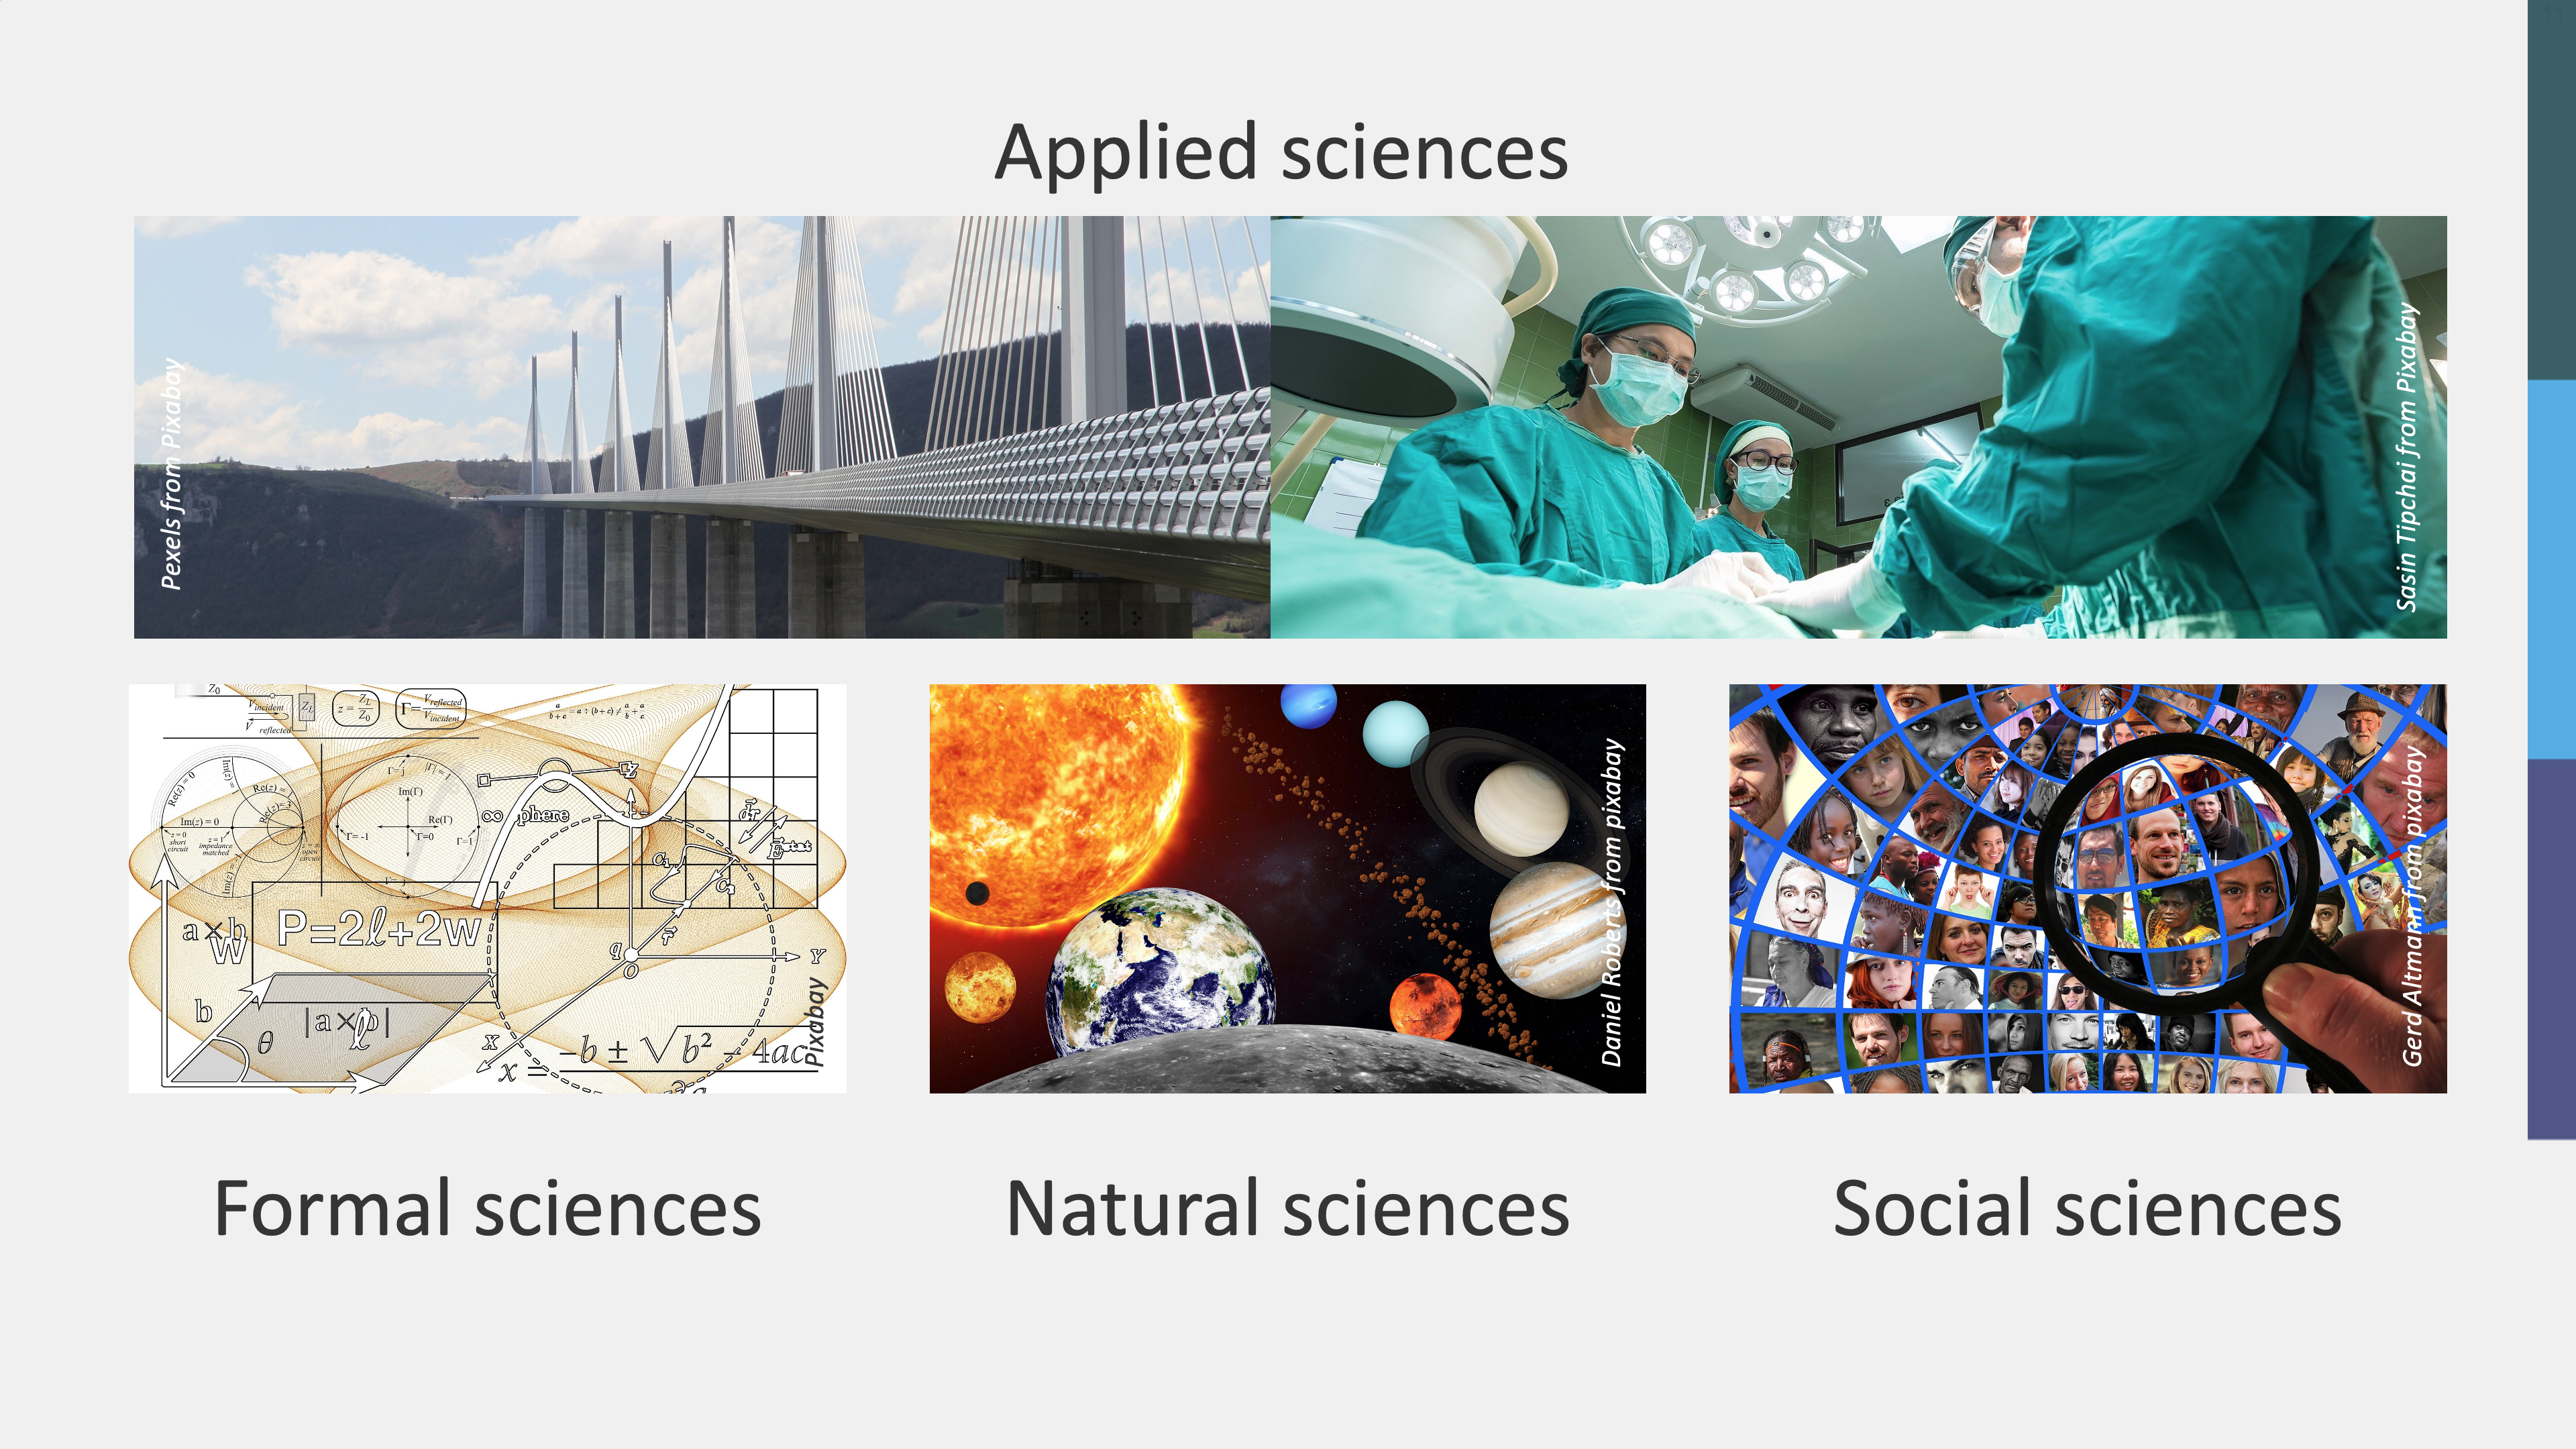 shows the four fields of science: formal, natural, social and applied sciences